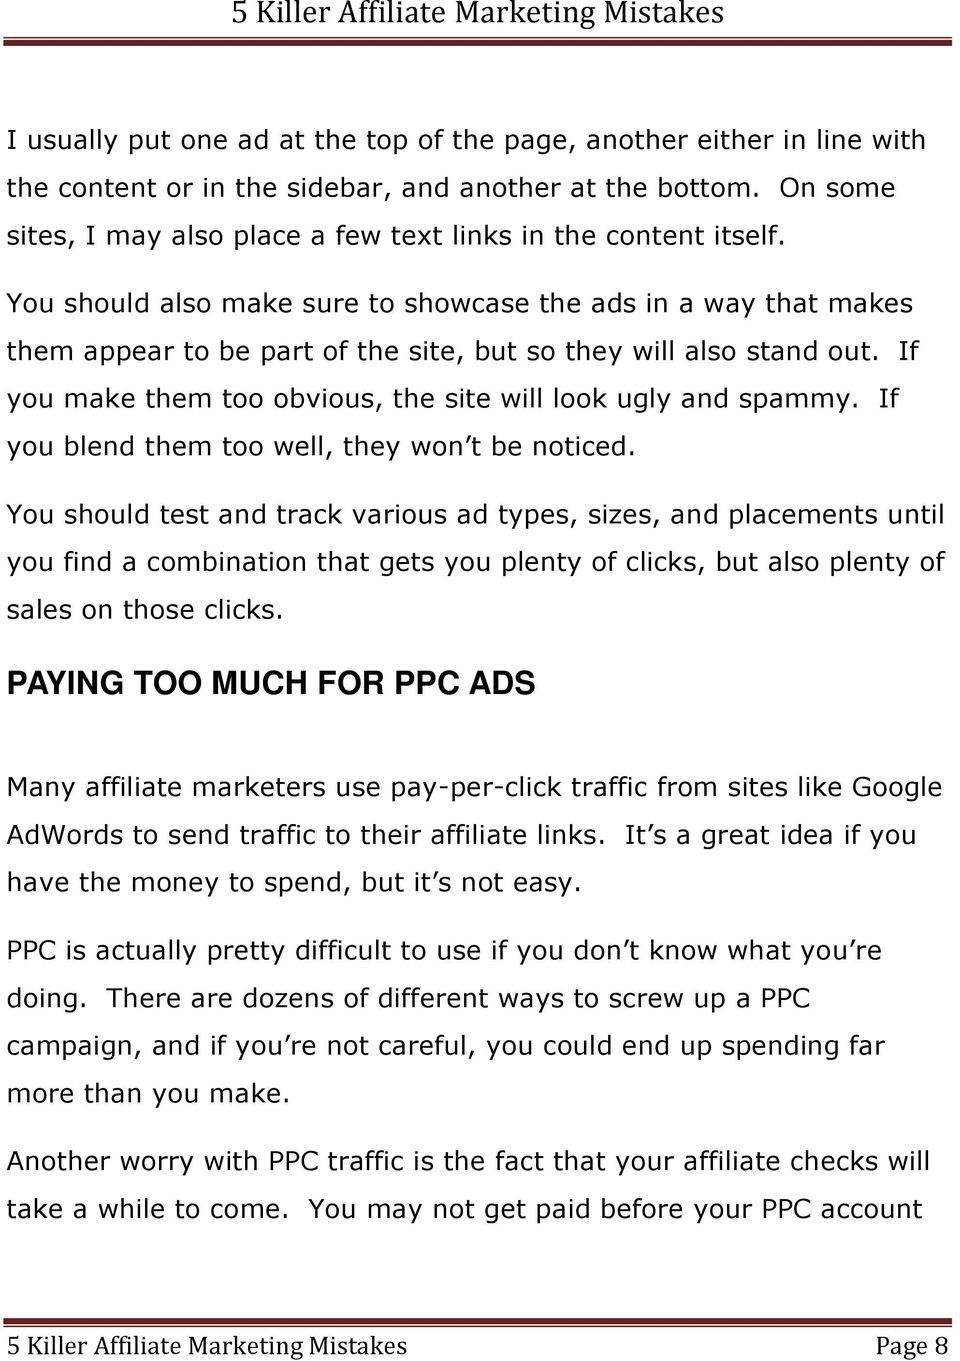 You should also make sure to showcase the ads in a way that makes them appear to be part of the site, but so they will also stand out. If you make them too obvious, the site will look ugly and spammy.